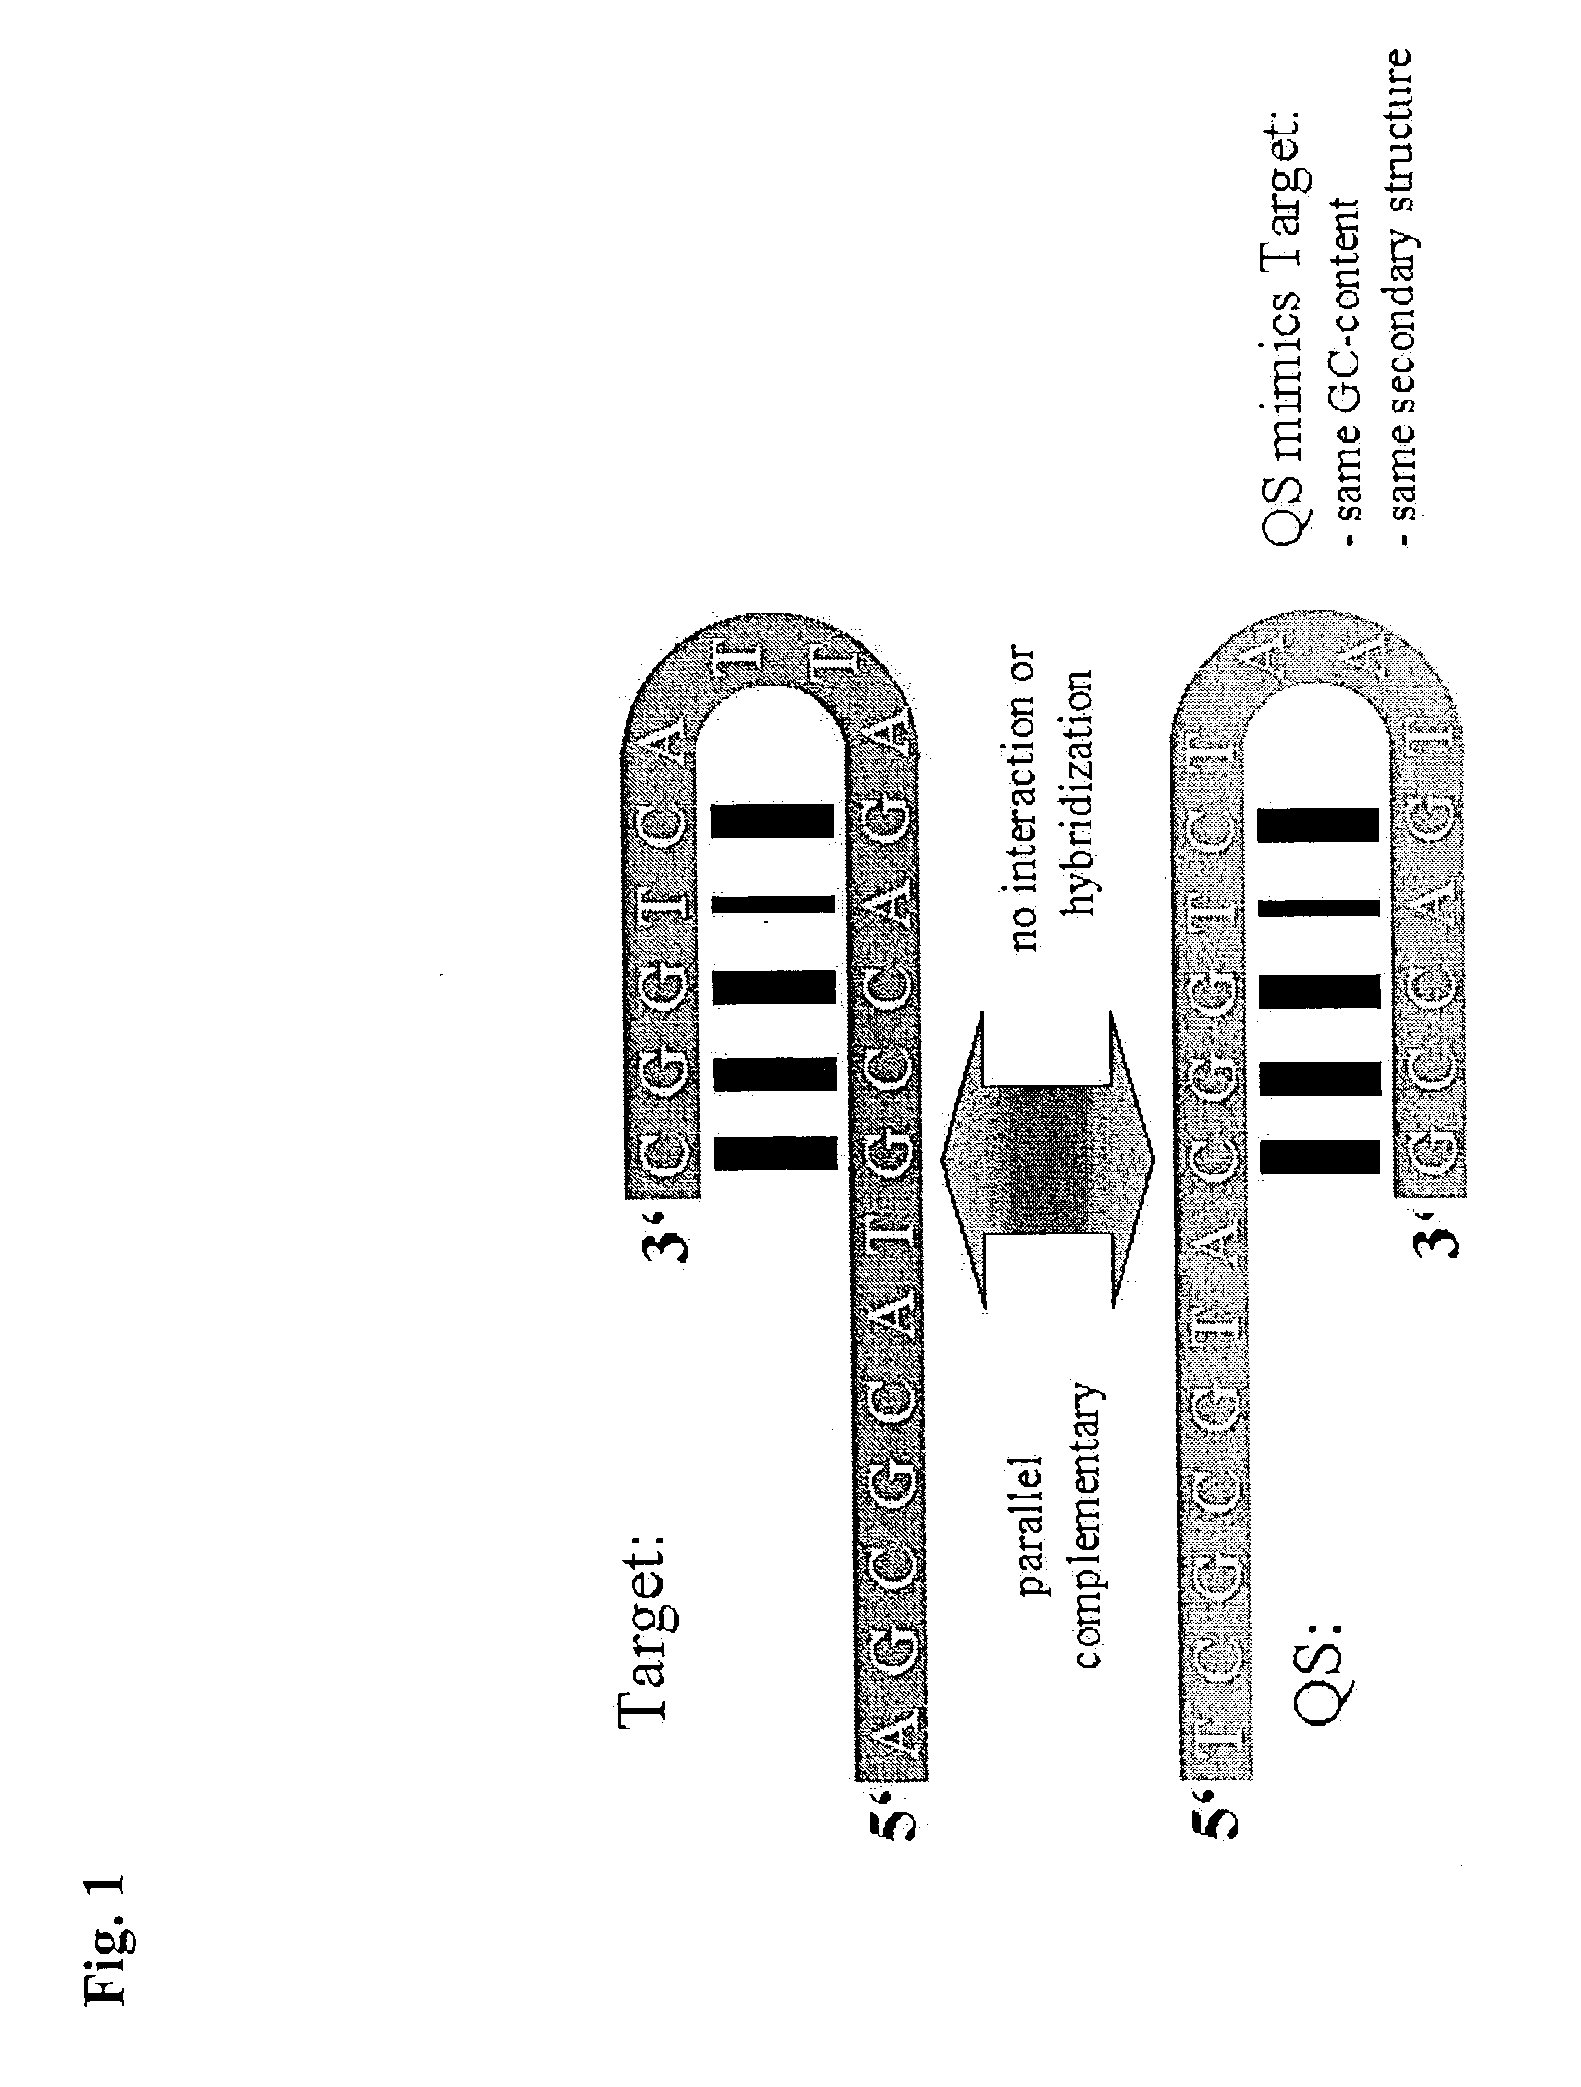 Method for the determination of a nucleic acid using a control